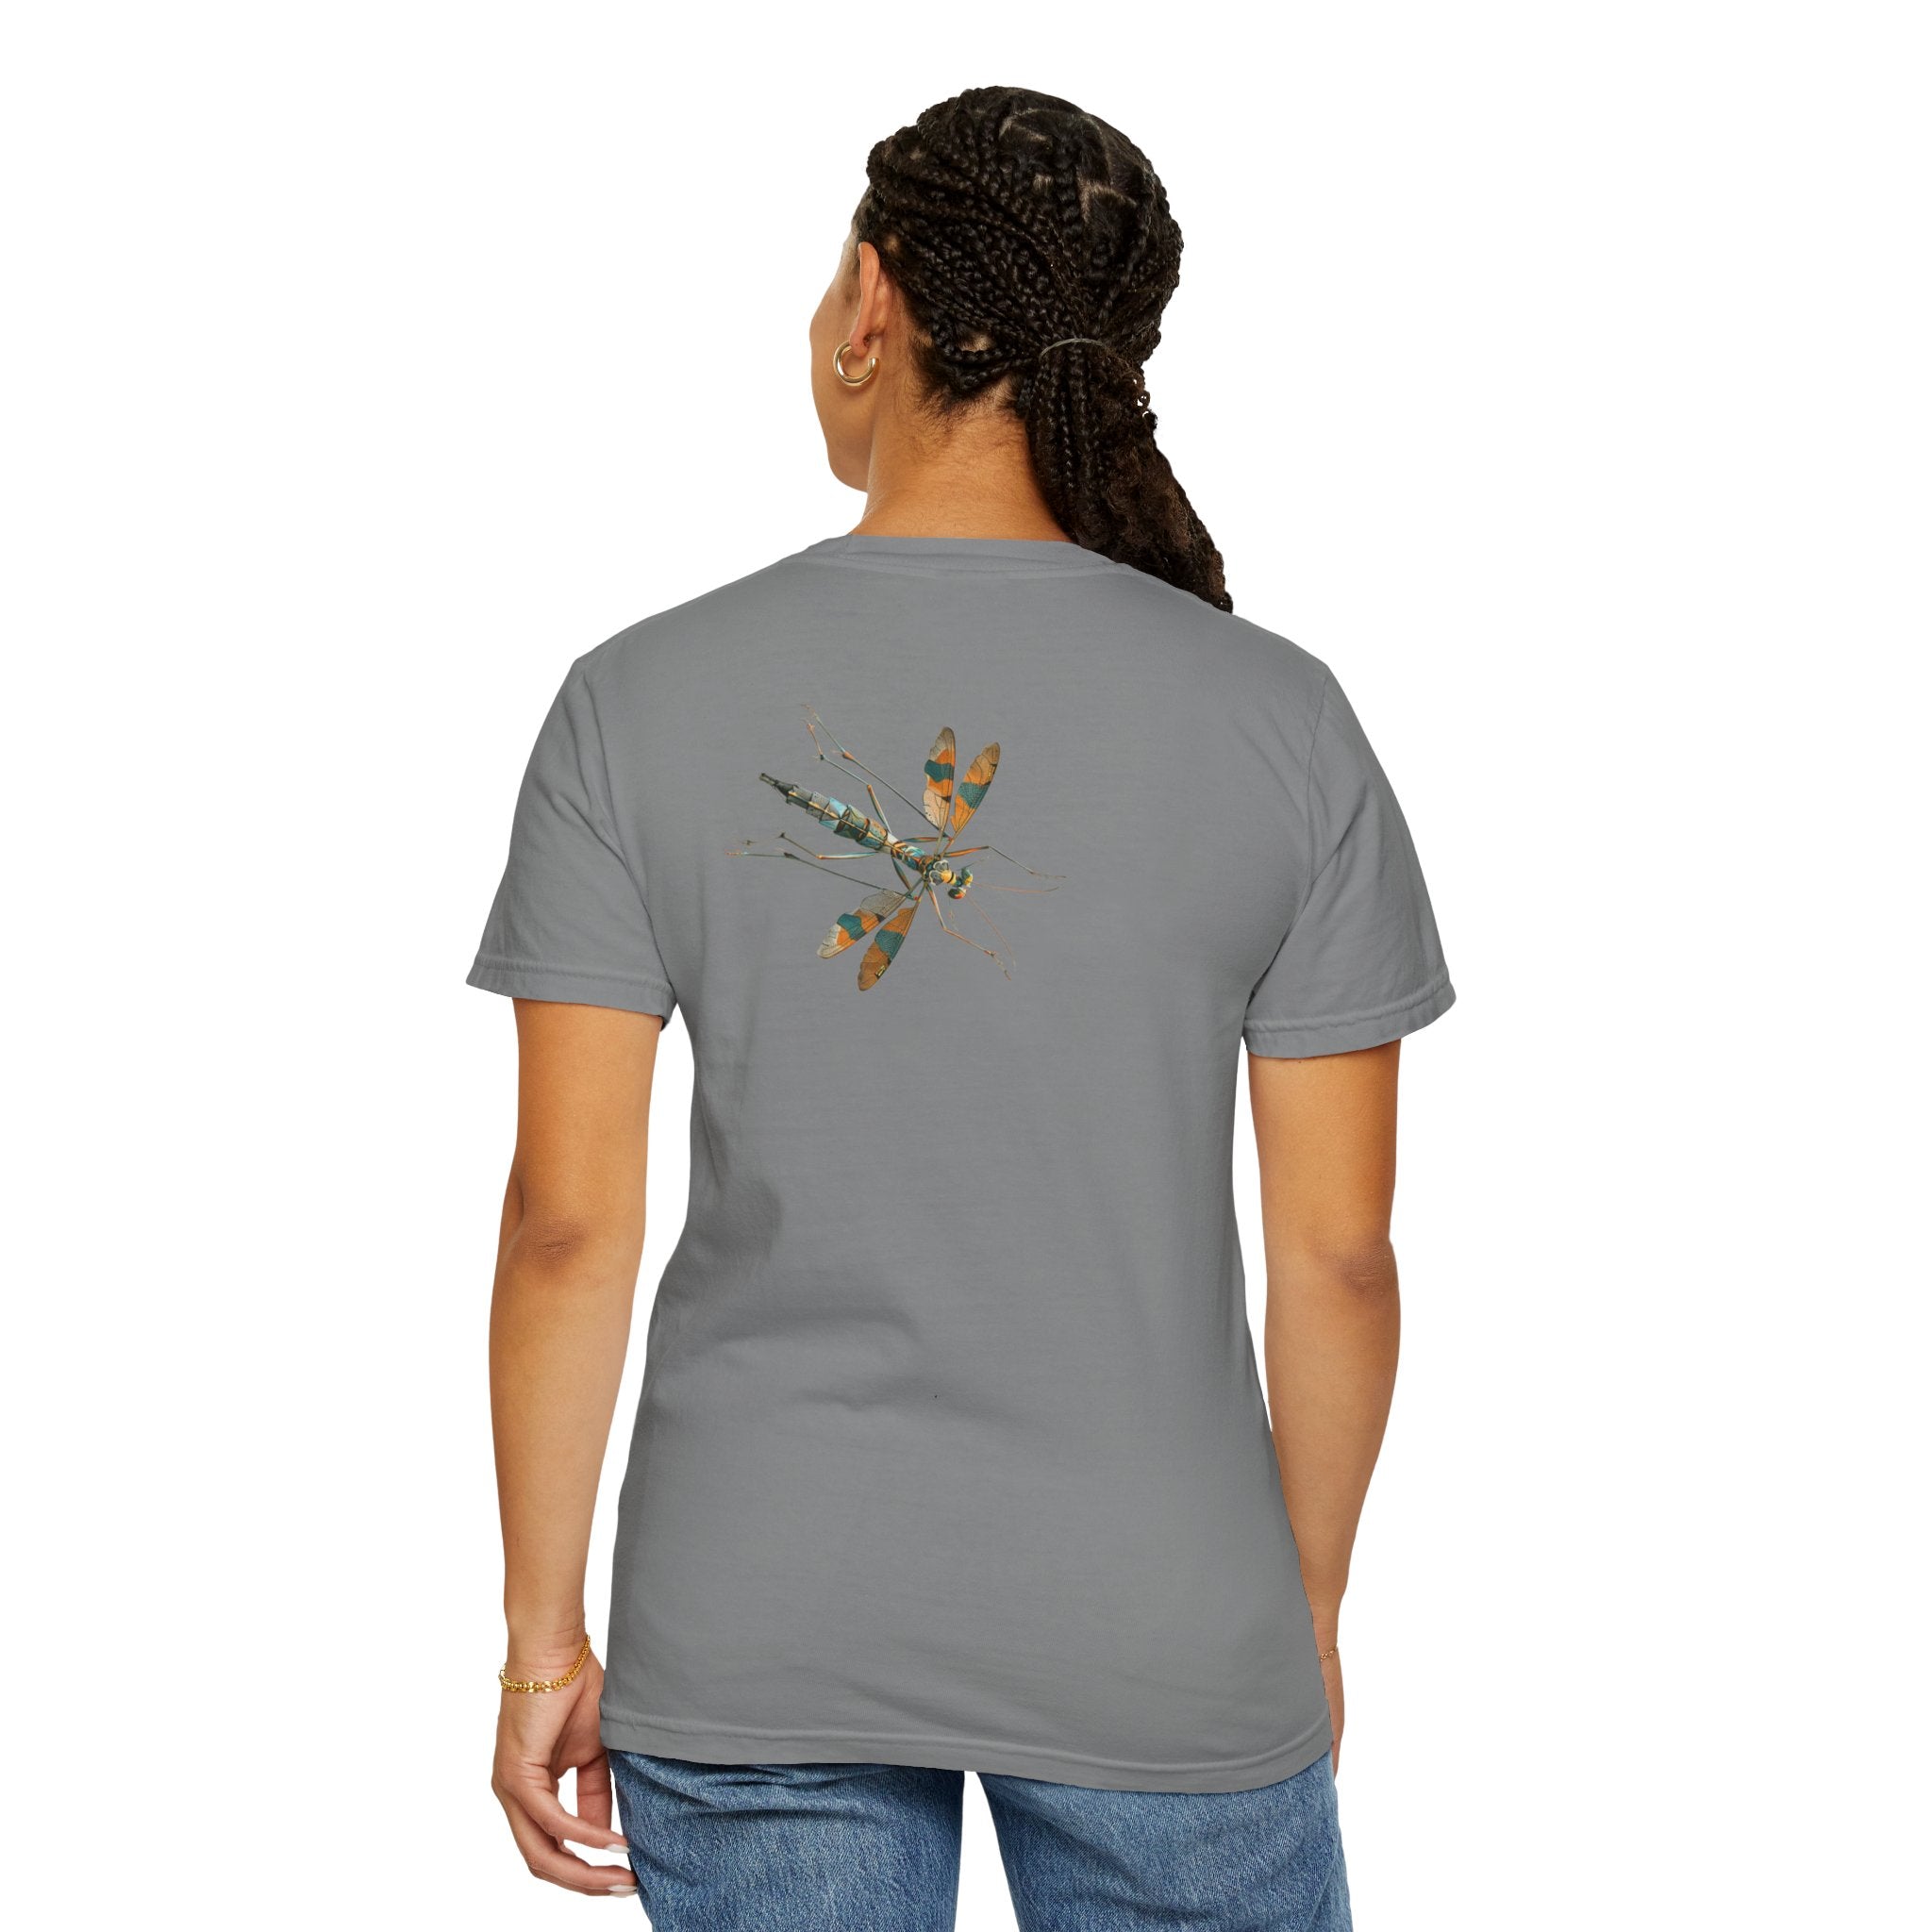 The image showcases a stylish unisex garment-dyed t-shirt in a soft, appealing color. The back of the shirt features a highly detailed, lifelike bug illustration that looks poised to crawl away. The front remains plain, directing all attention to the joke played on the unsuspecting viewers behind the wearer